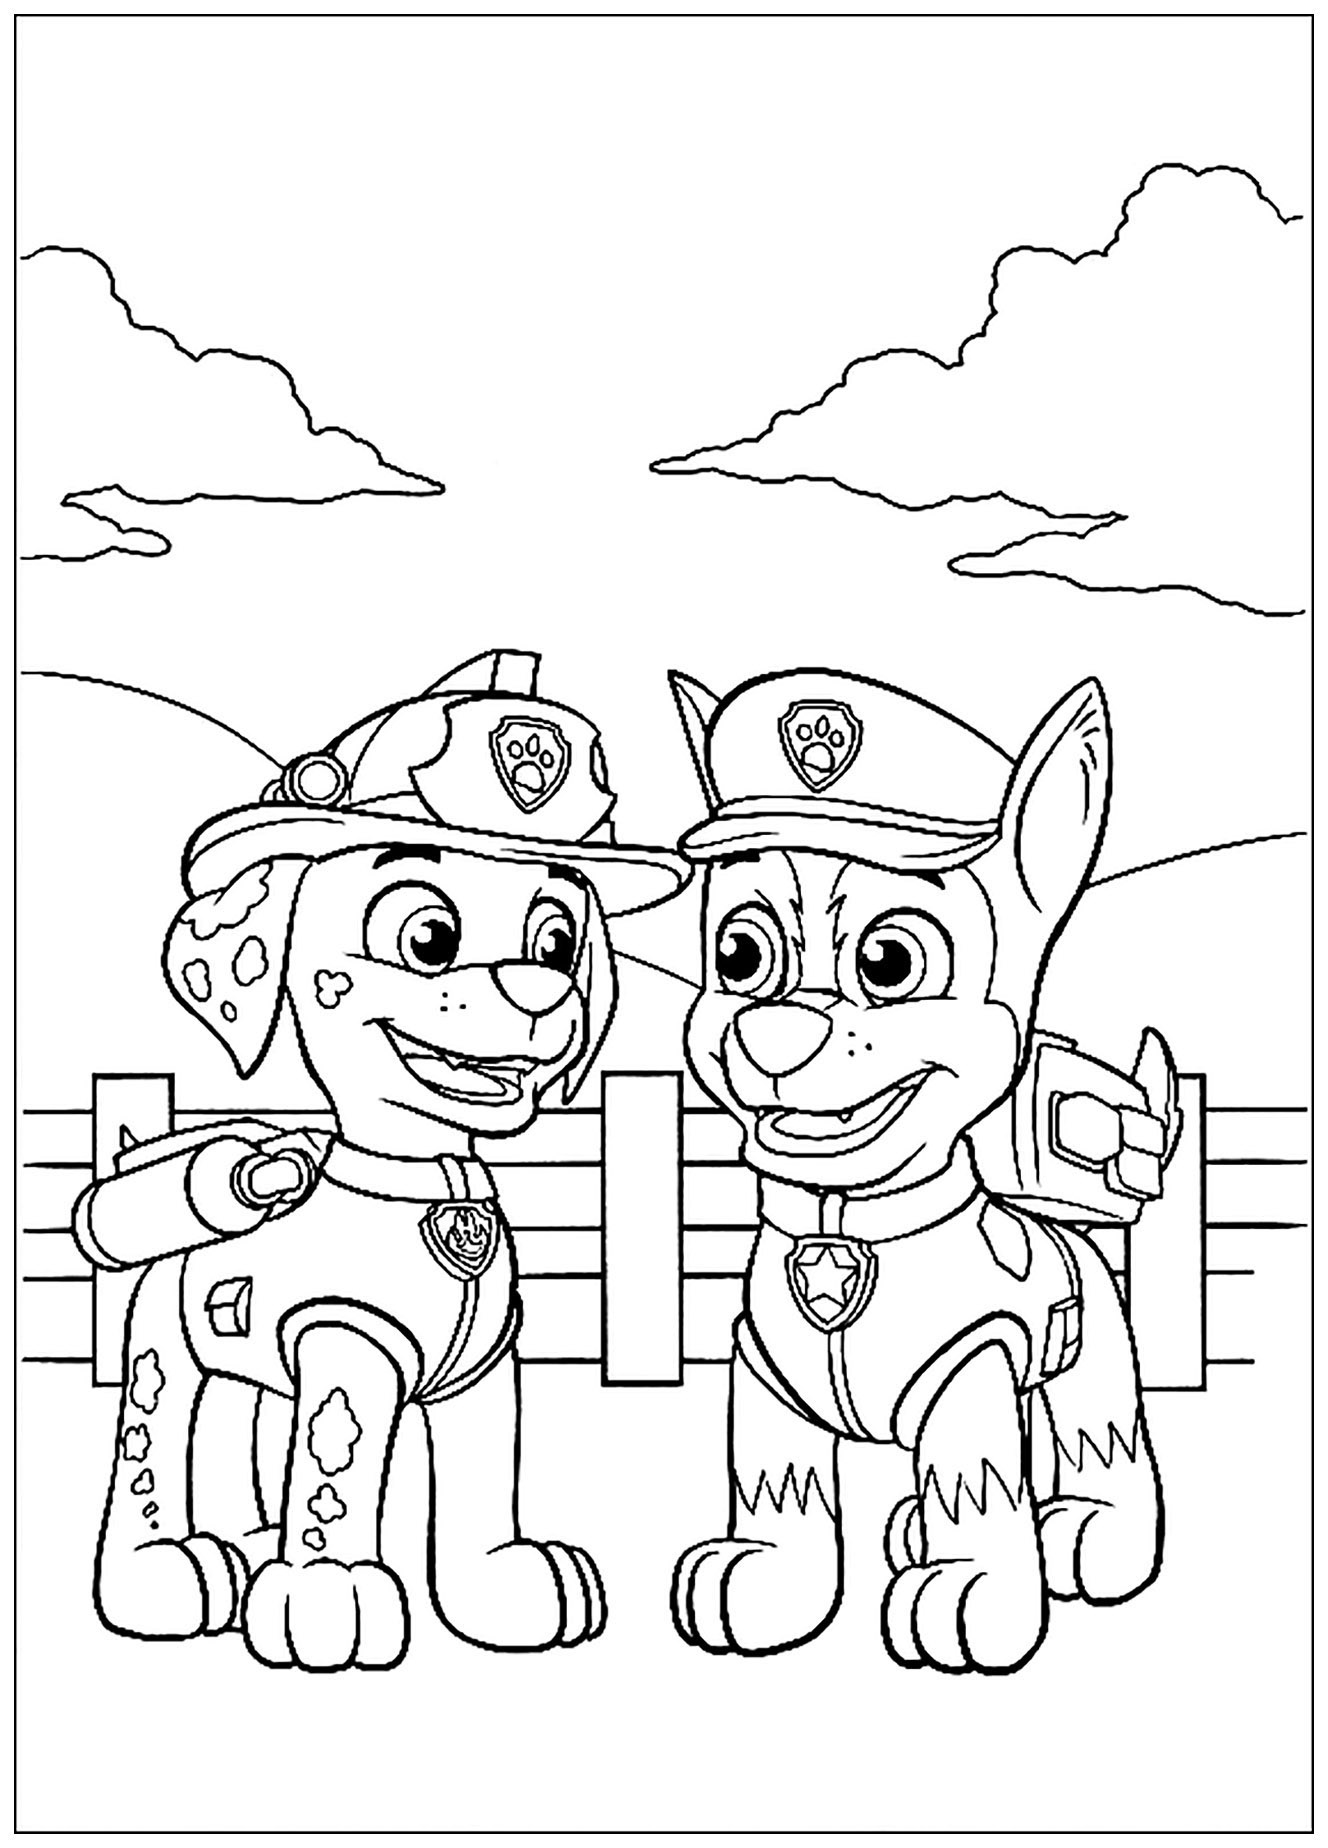 Easy Patrol coloring pages for kids